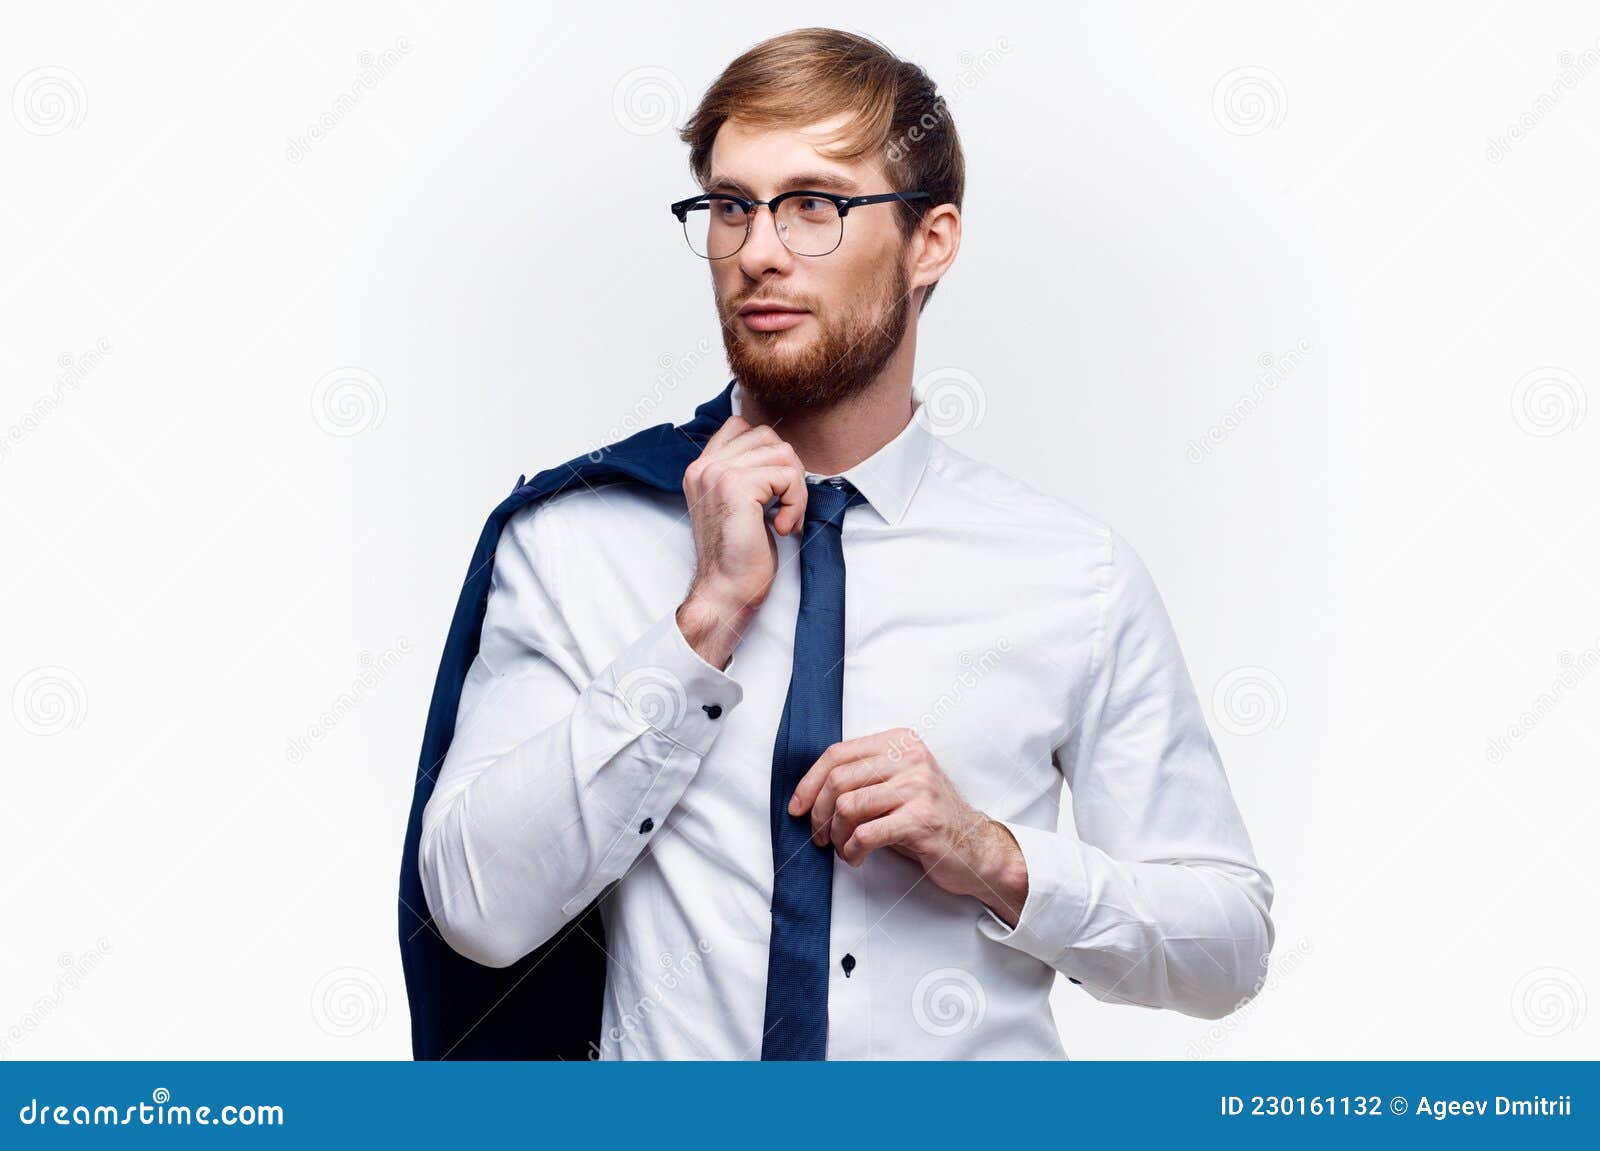 Business Man Shirt with Tie Official Fashion Close Up Stock Photo ...